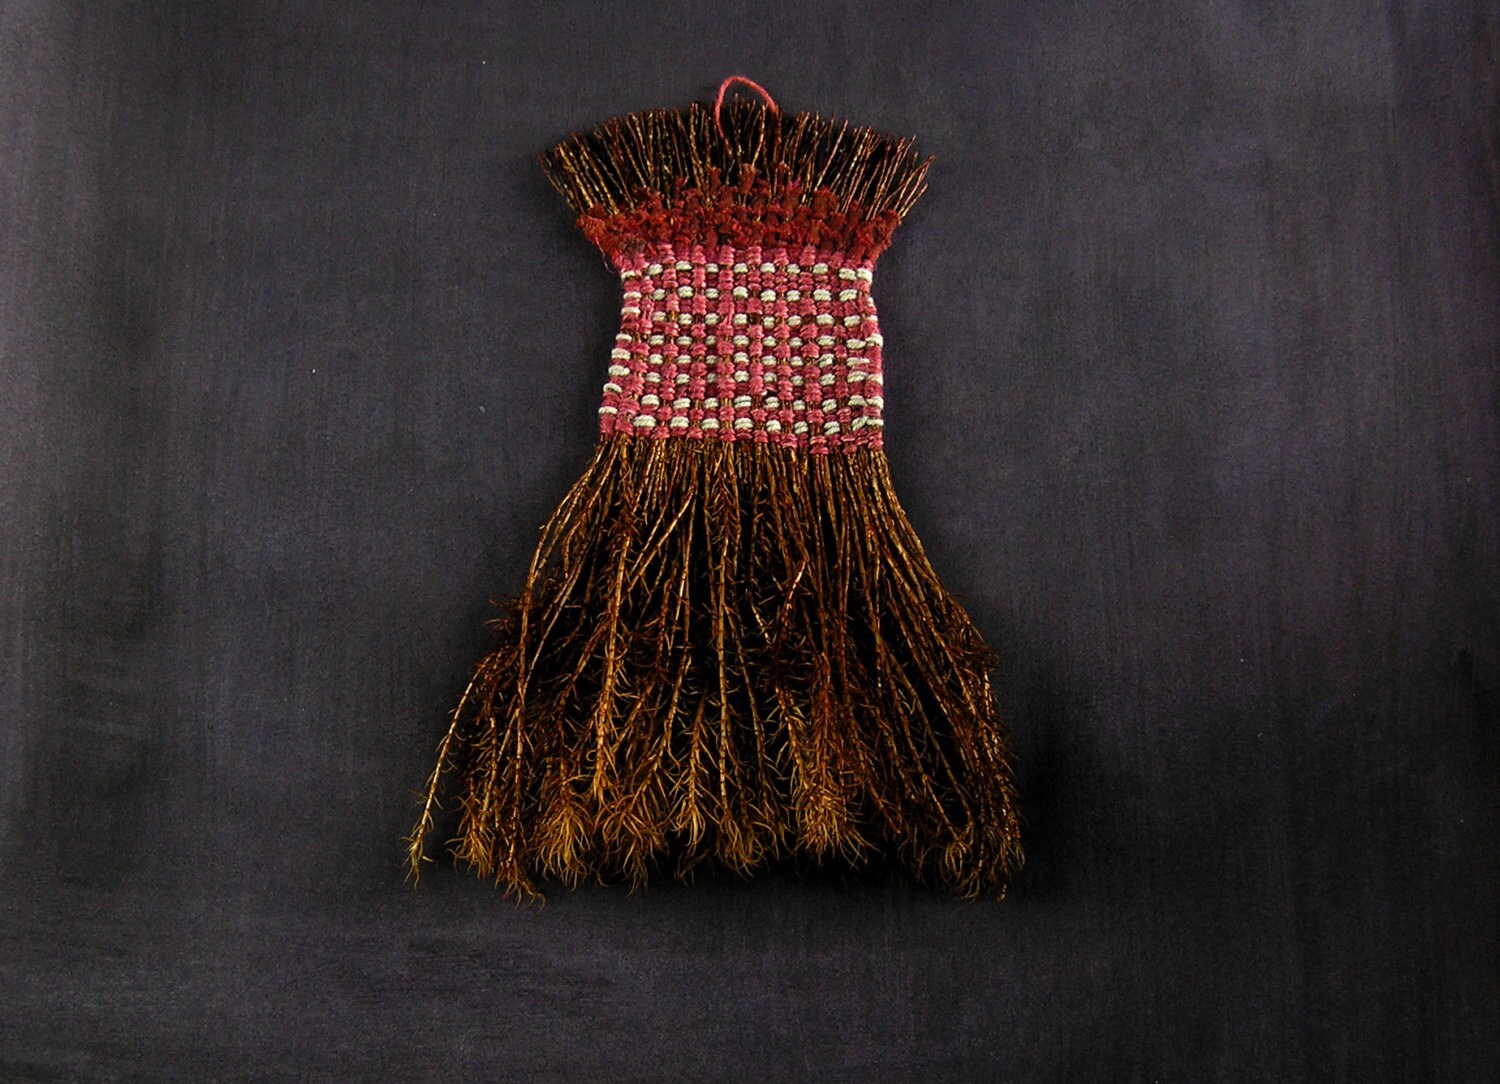 Small Whisk Broom - Kitchen Wall Decor - Country and Primitive Wall Decor - Birribe